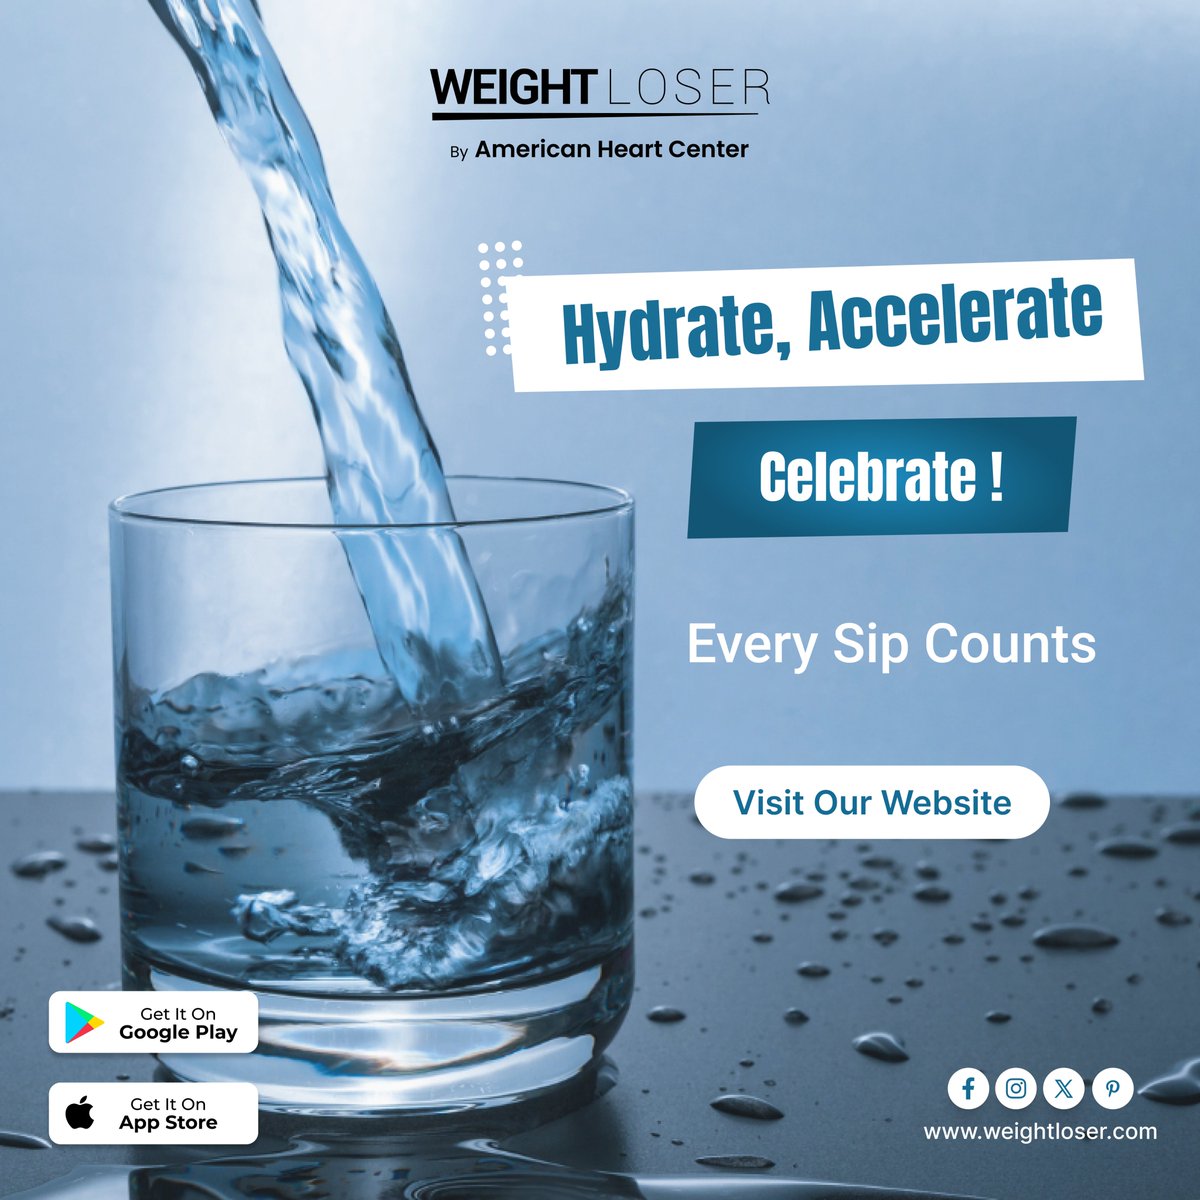 Stay hydrated, and shed pounds! 💧 

Boost metabolism with water. This Healthy Weight Week, track hydration with WeightLoser.

Visit our website weightloser.com and get 50% off. Stay healthy, Stay hydrated! 🥤

#Hydrate #metabolismboost #trackingprogress #healthyhabits